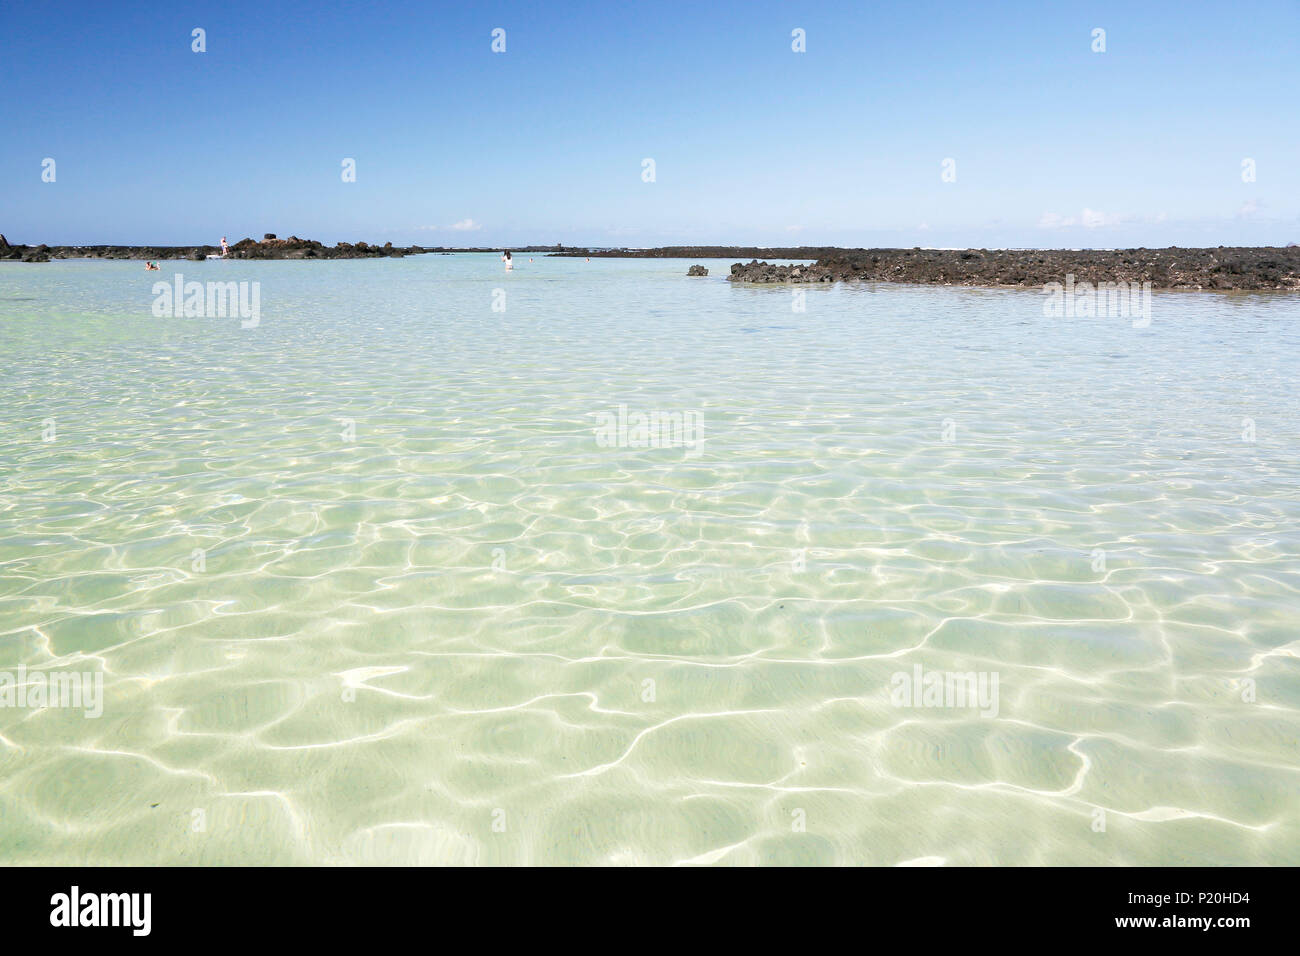 Spain. Canary Islands. Lanzarote. Orzola. The lagoons. Stock Photo